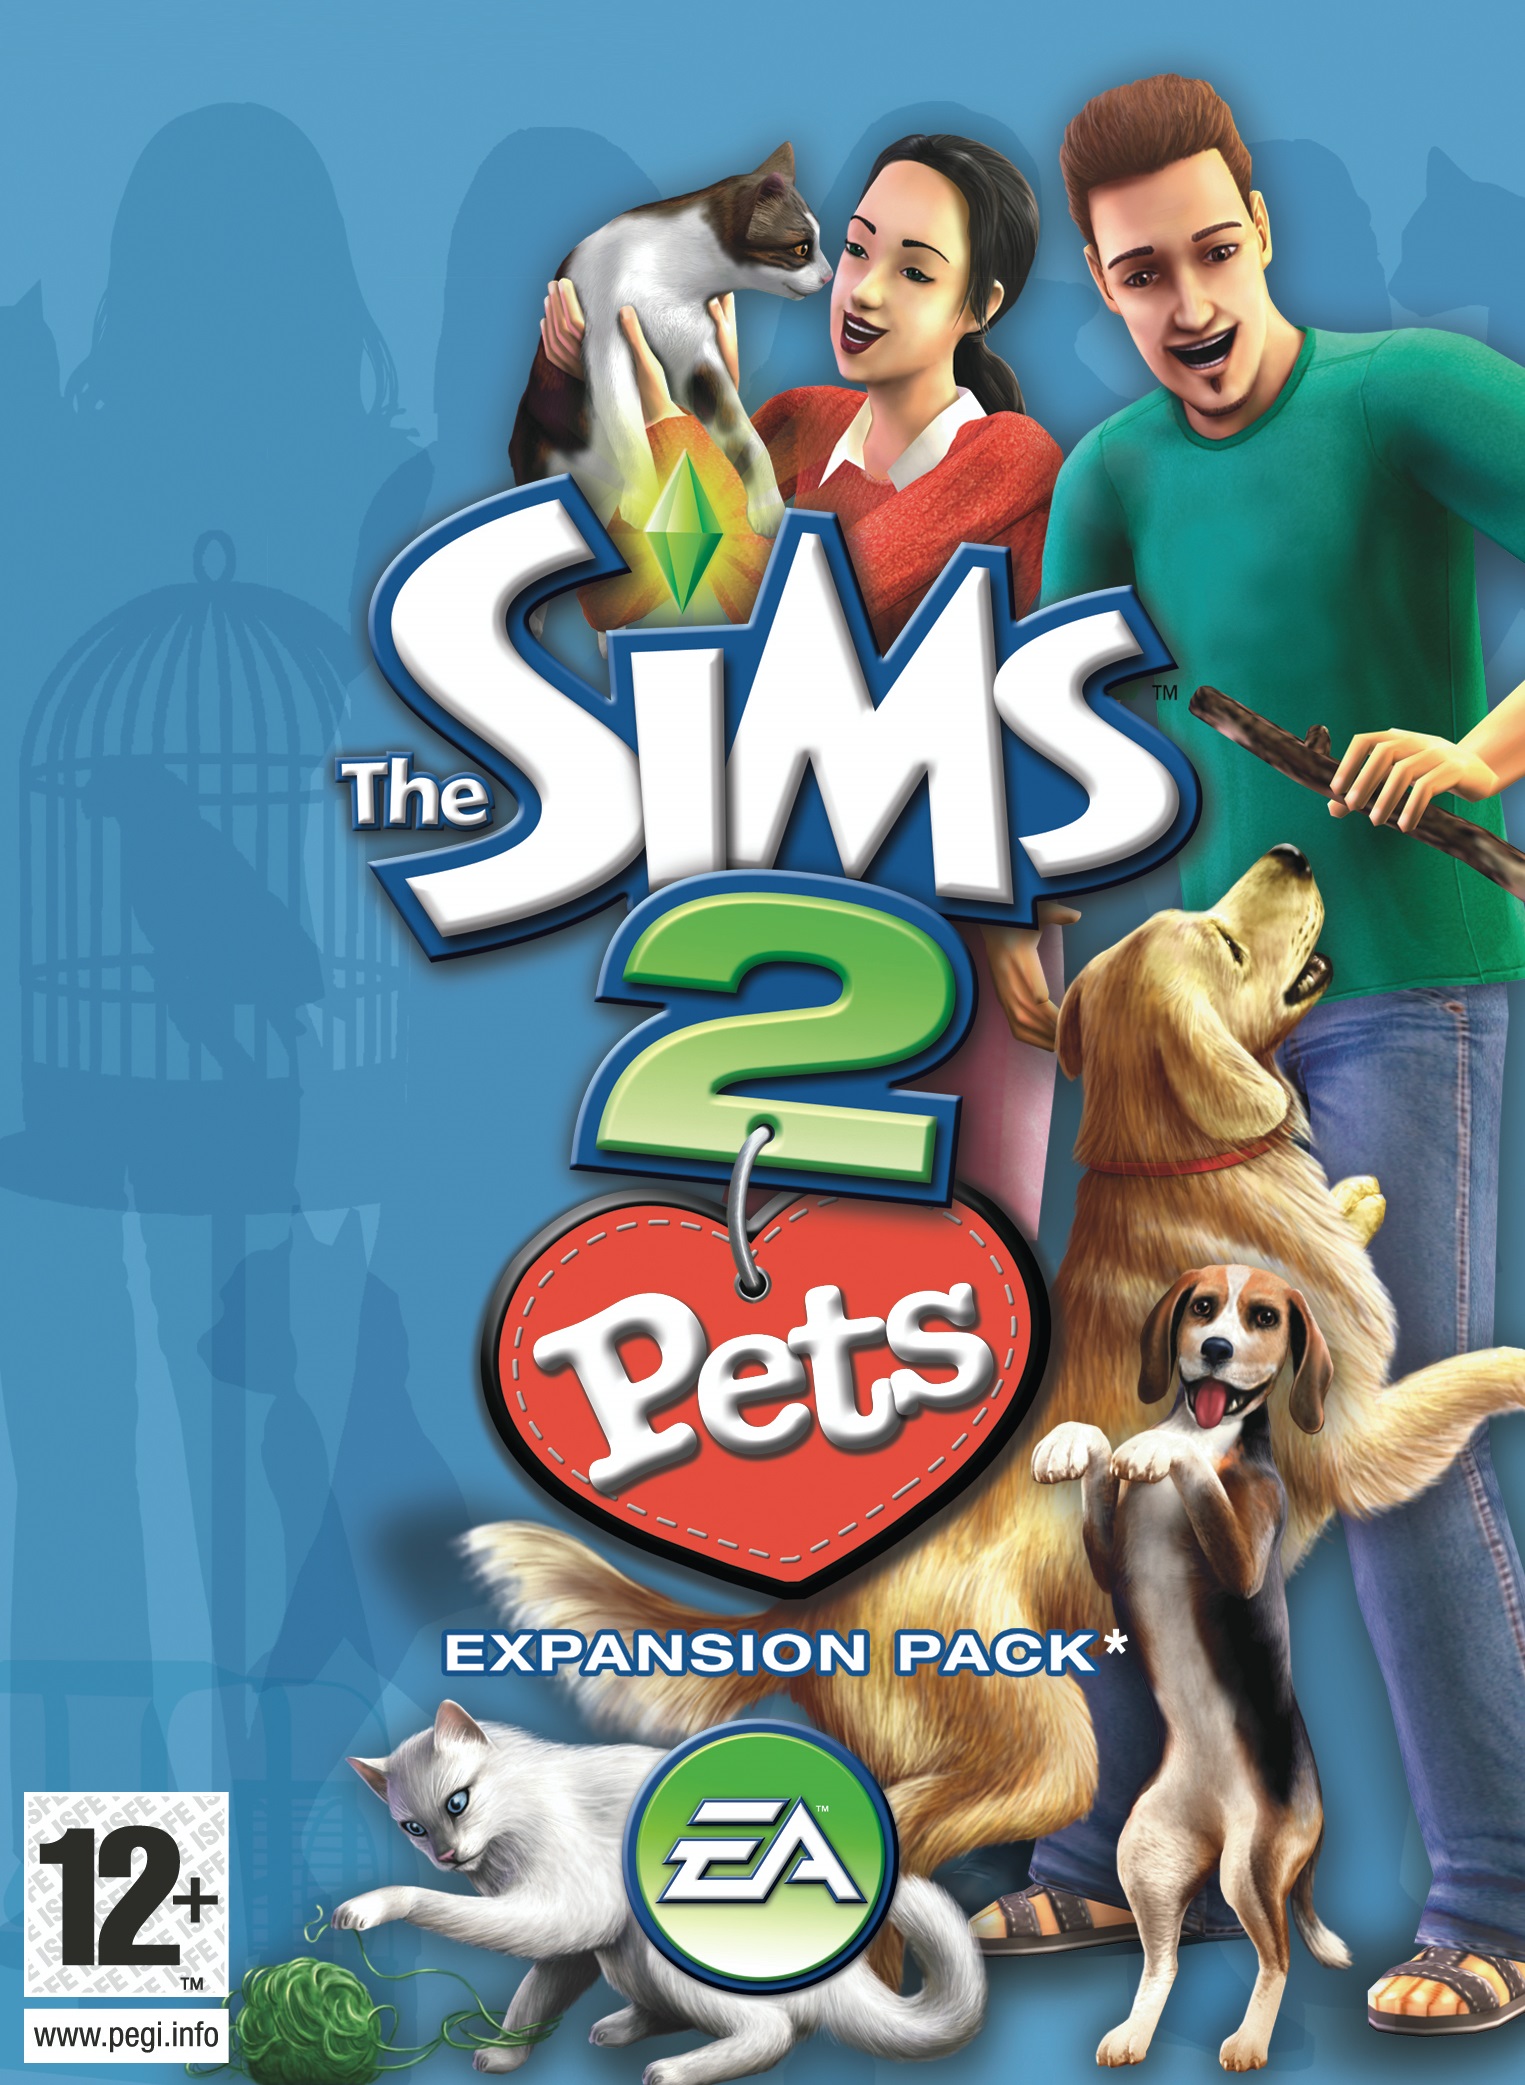 the sims 2 pets free